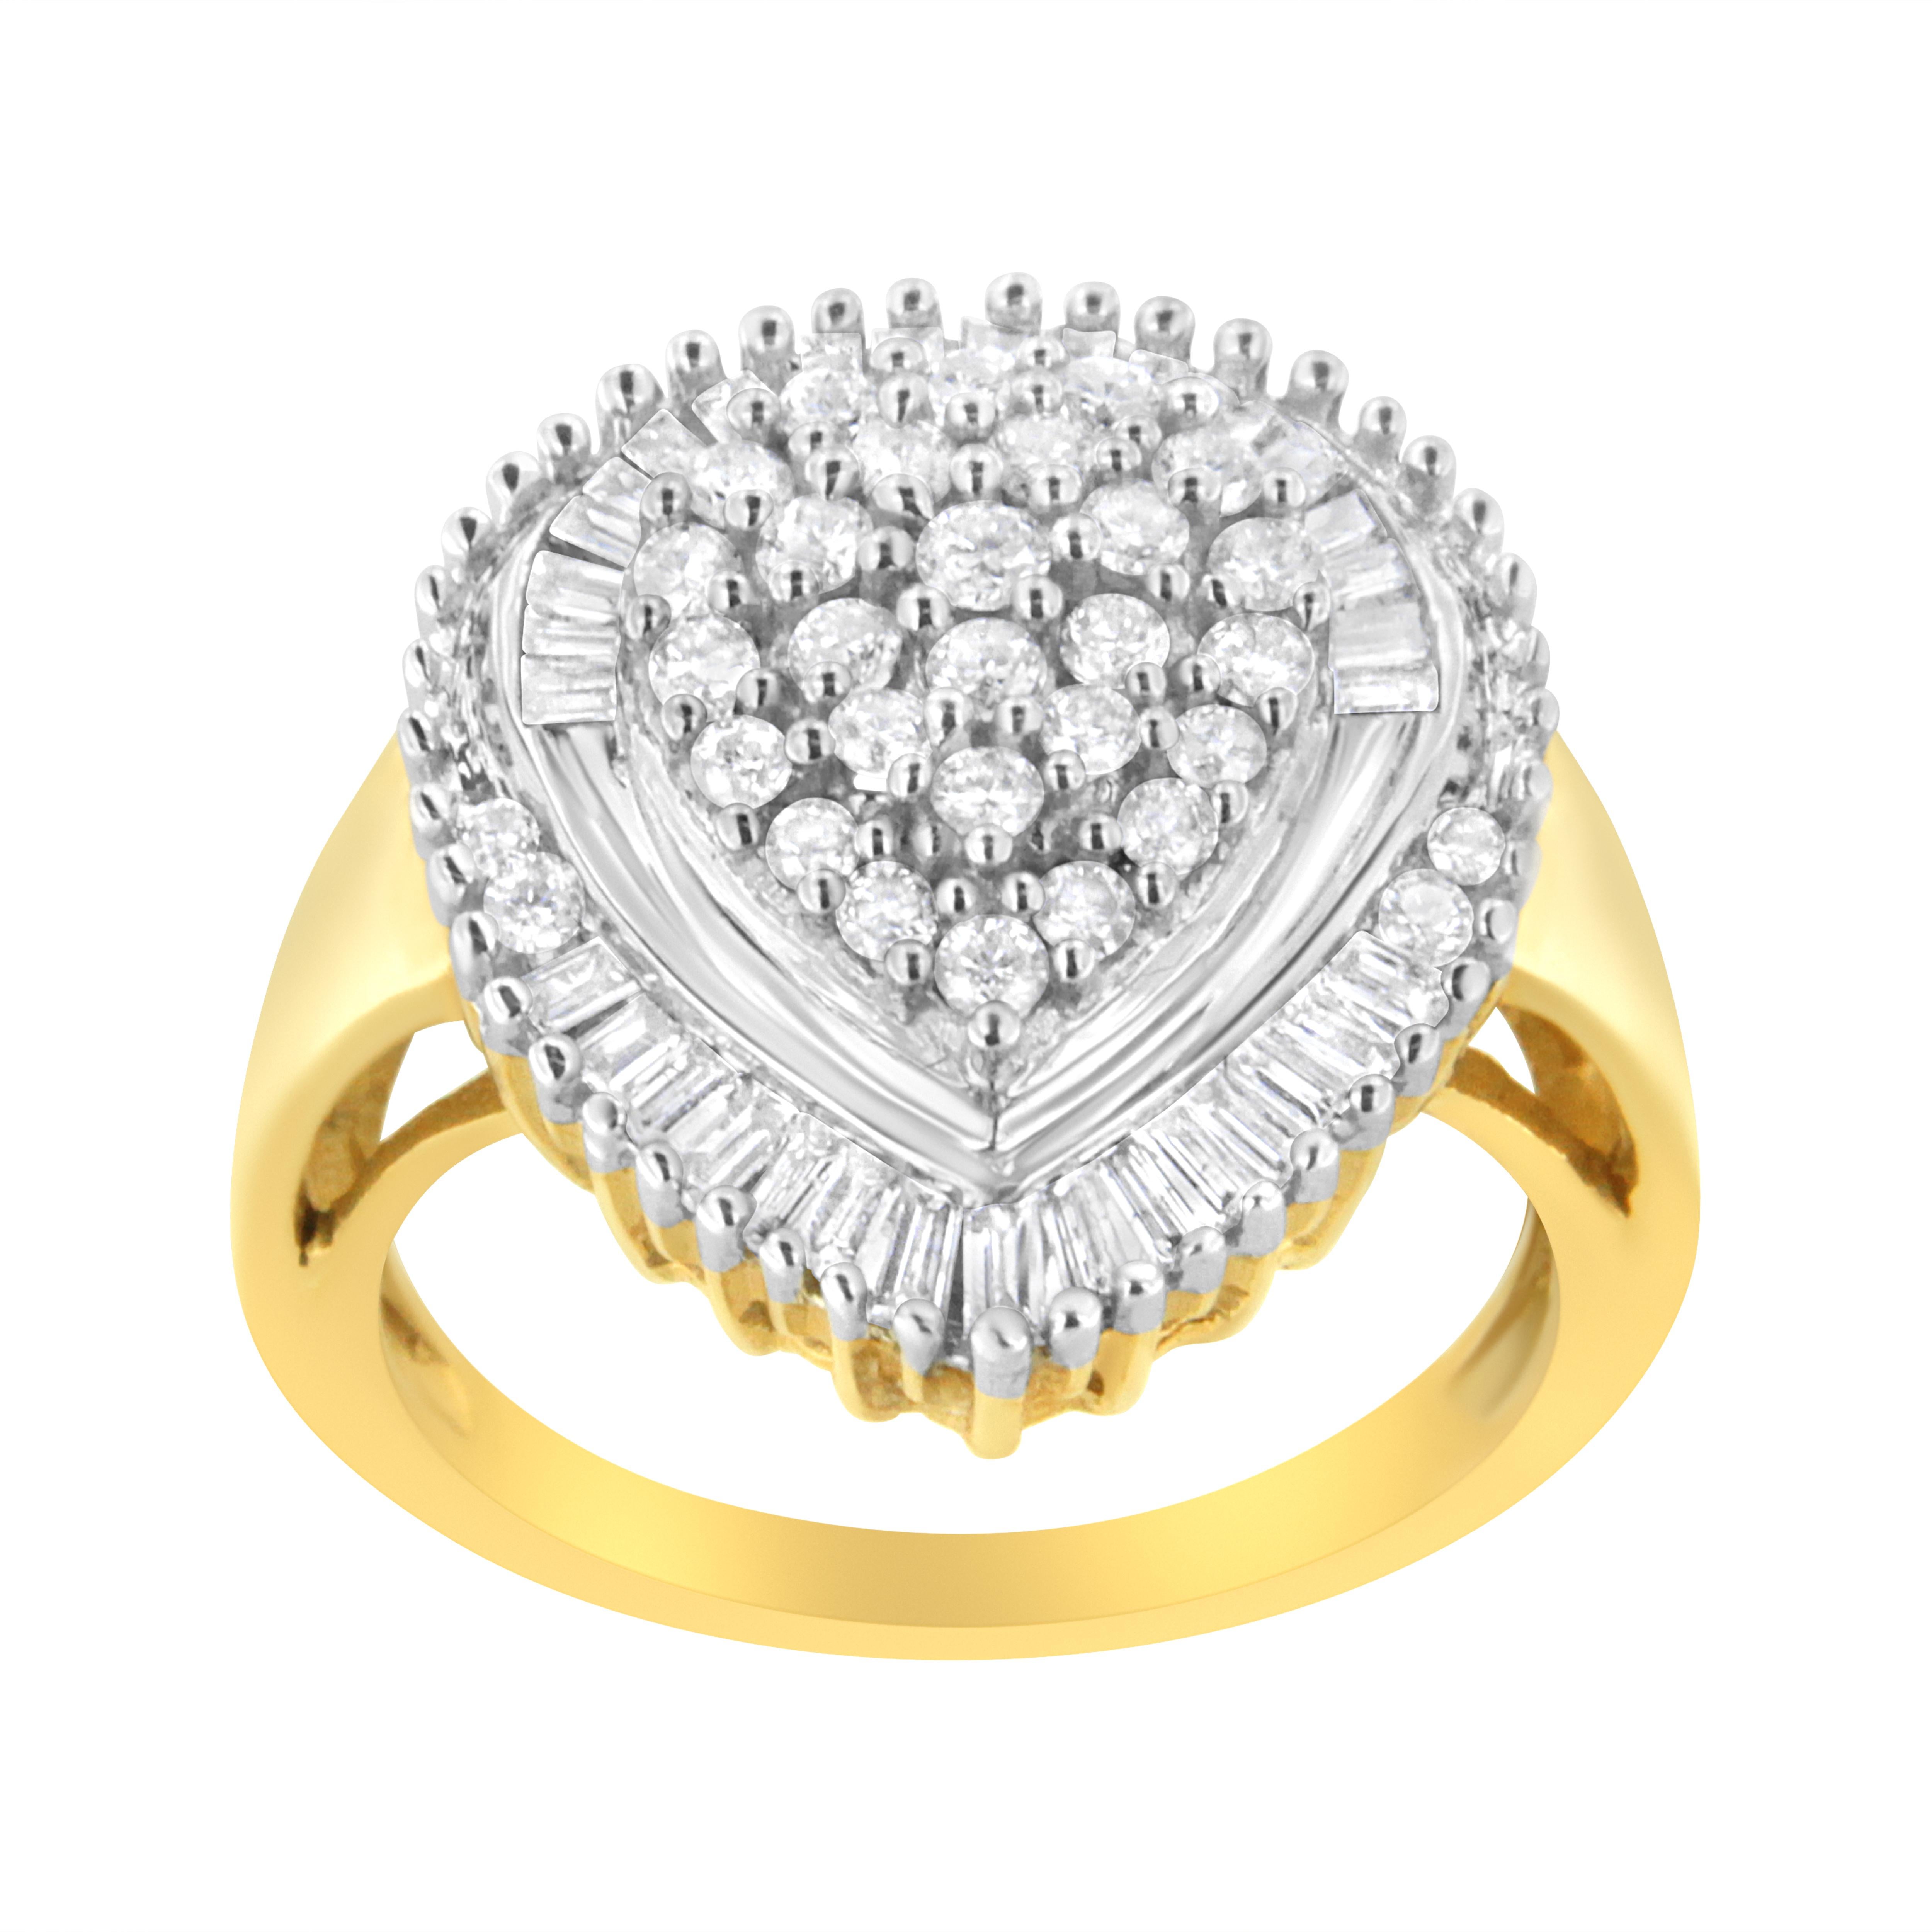 For Sale:  10K Yellow Gold 1.0 Cttw Round and Baguette Cut Diamond Oval Shaped Cluster Ring 3